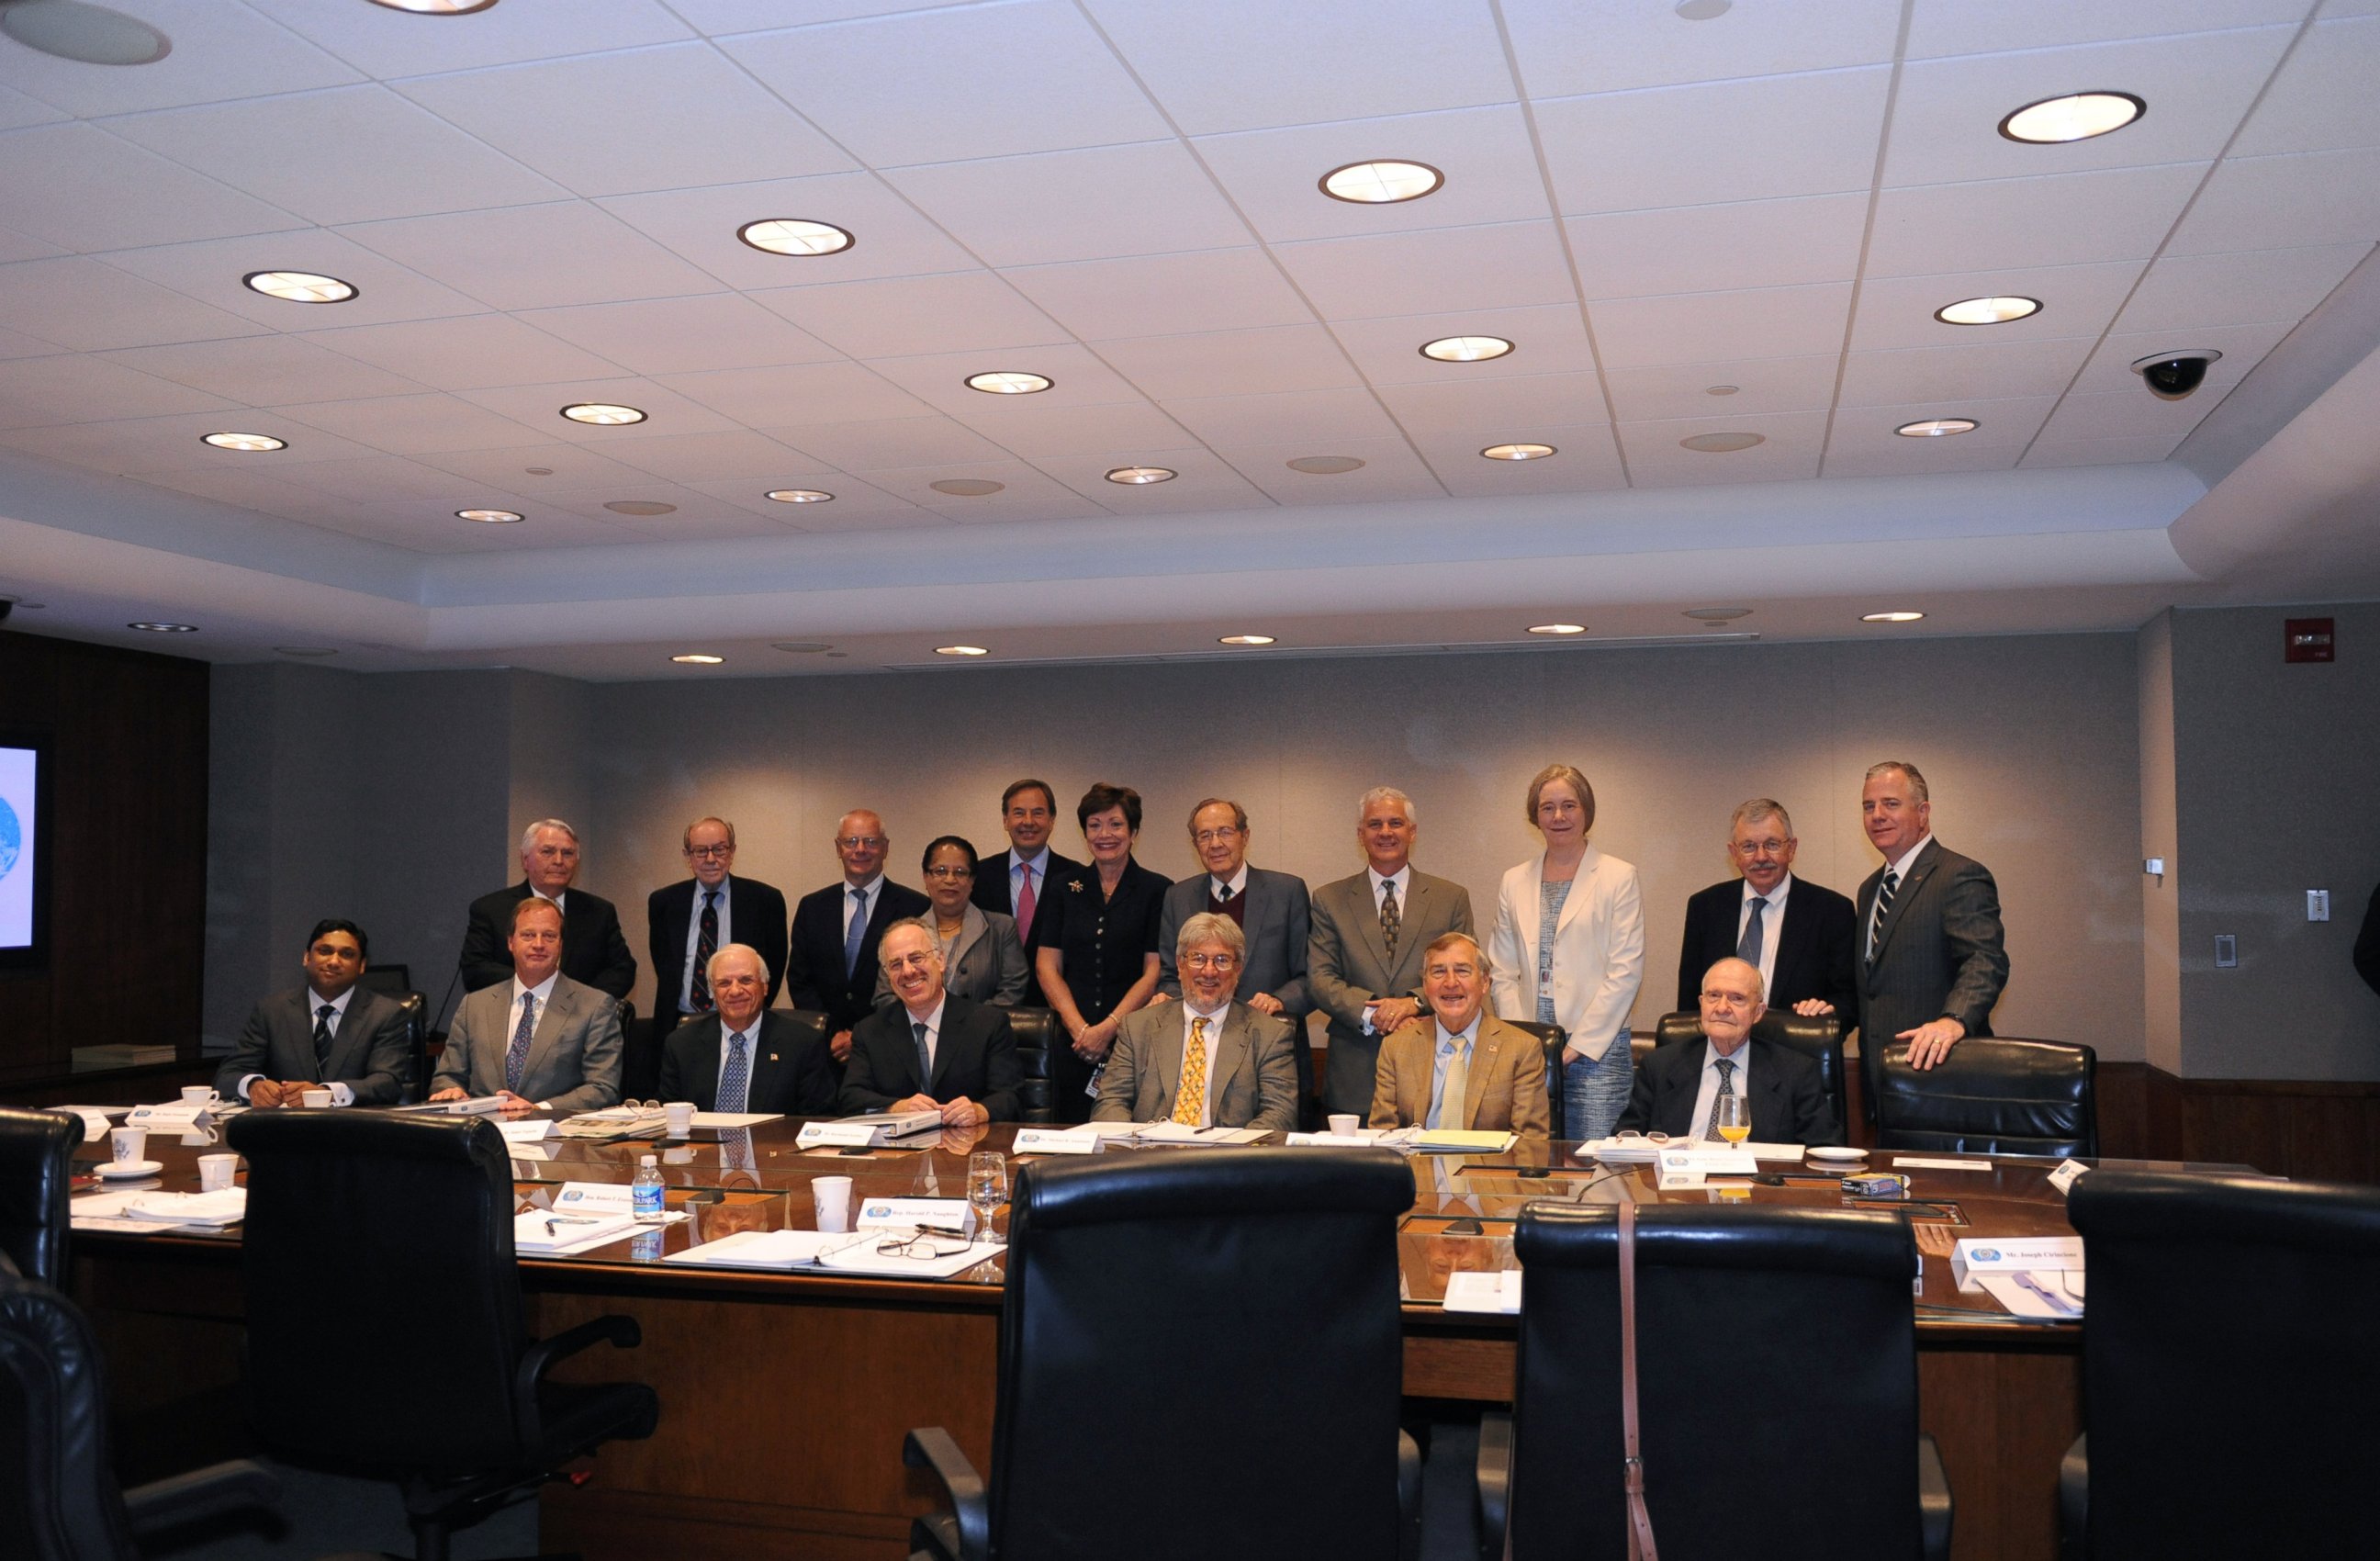 PHOTO: A State Department photograph shows the 2011 International Security Advisory Board. Rajiv Fernando is seated on the far left of the image.